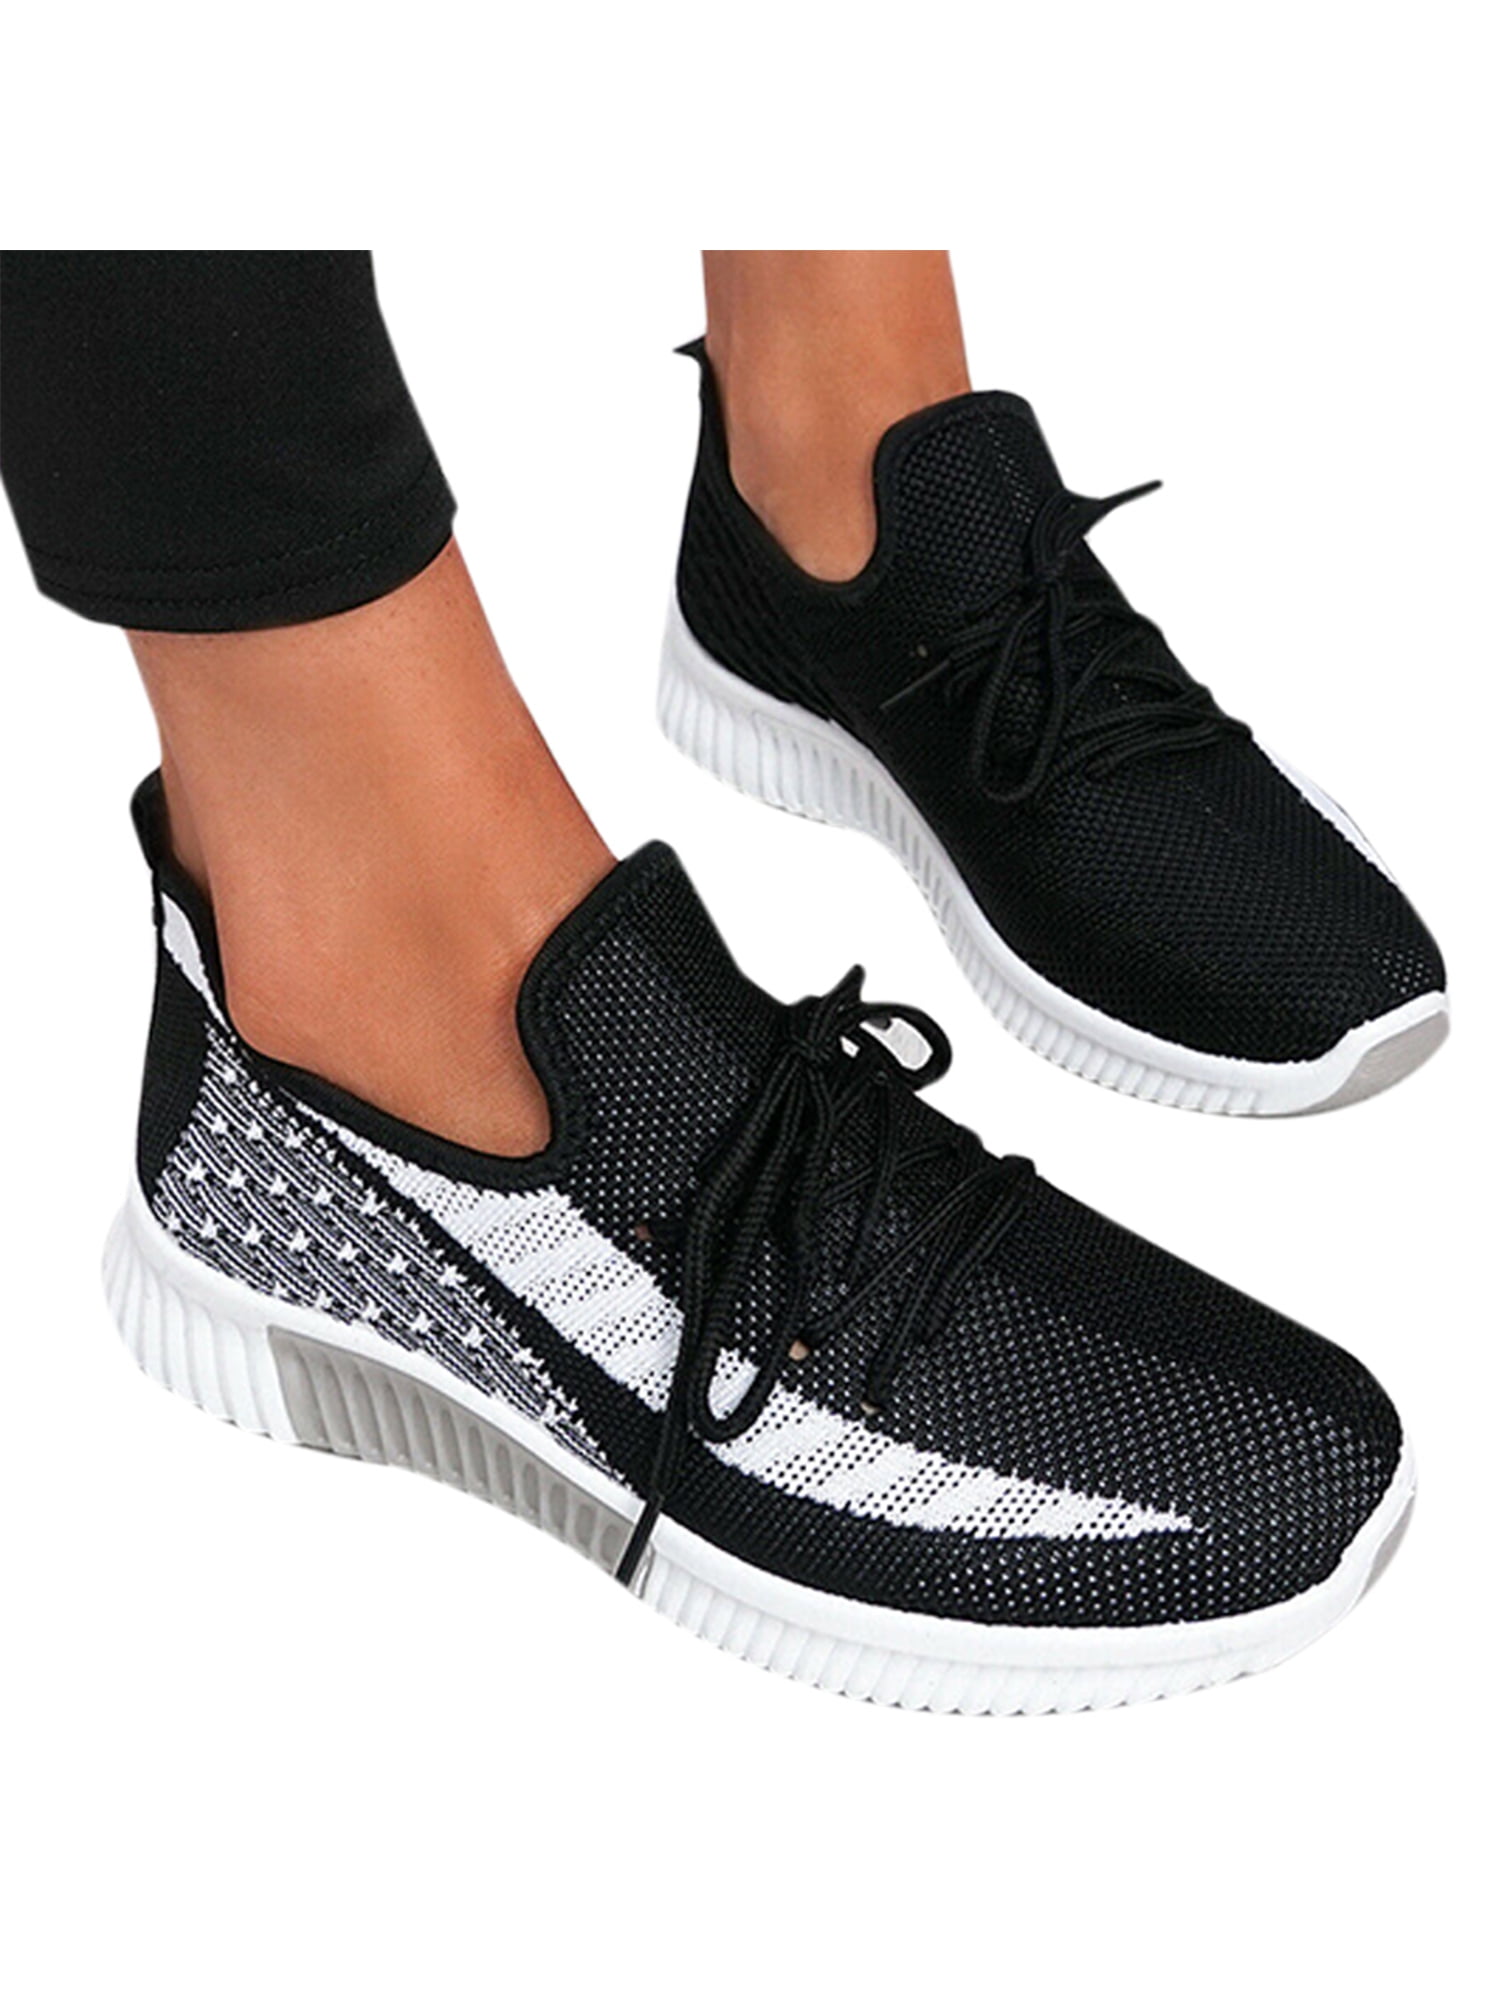 breathable shoes womens